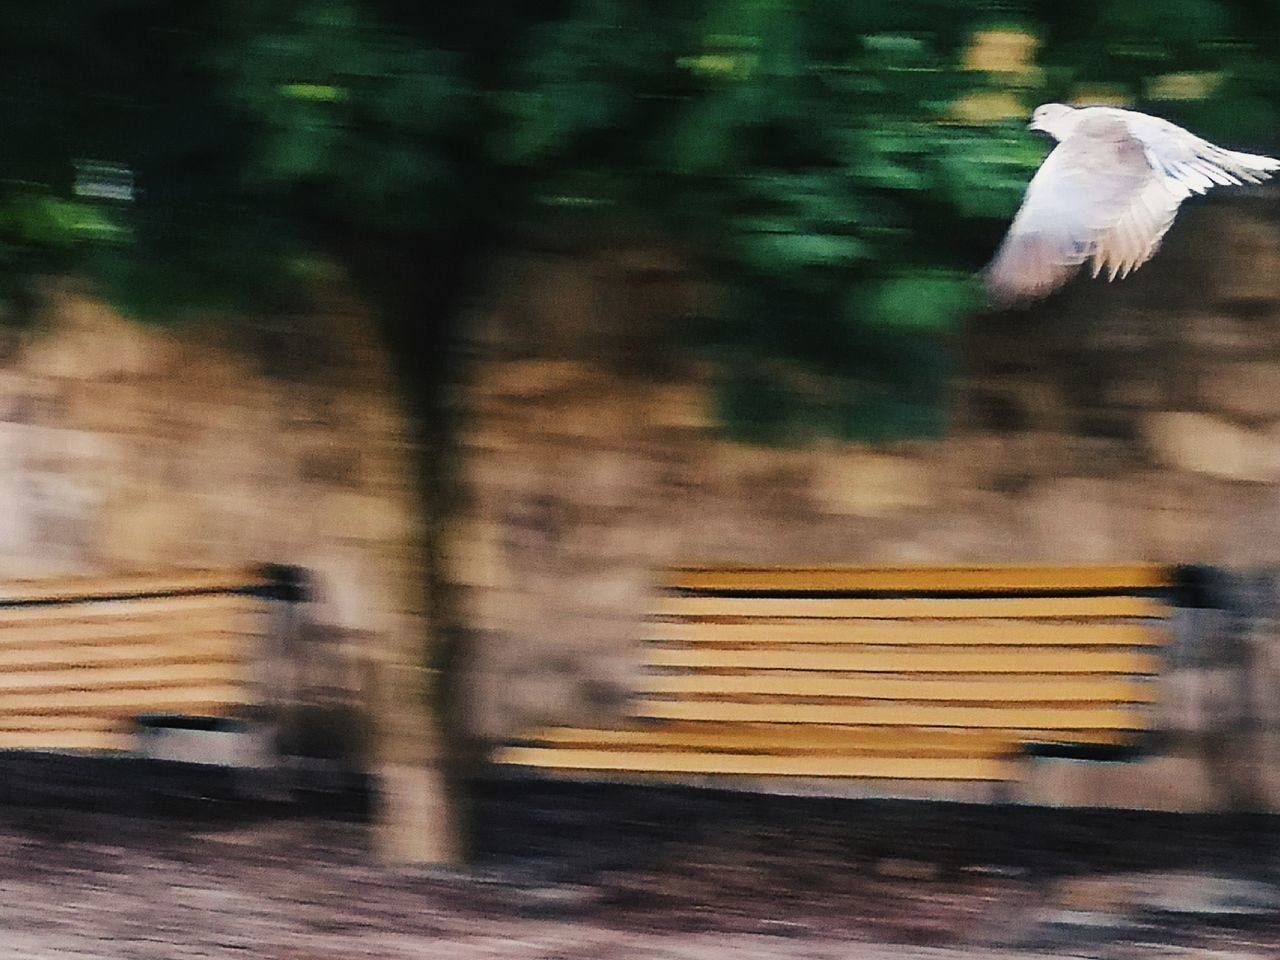 BLURRED MOTION OF BIRD FLYING IN THE SKY